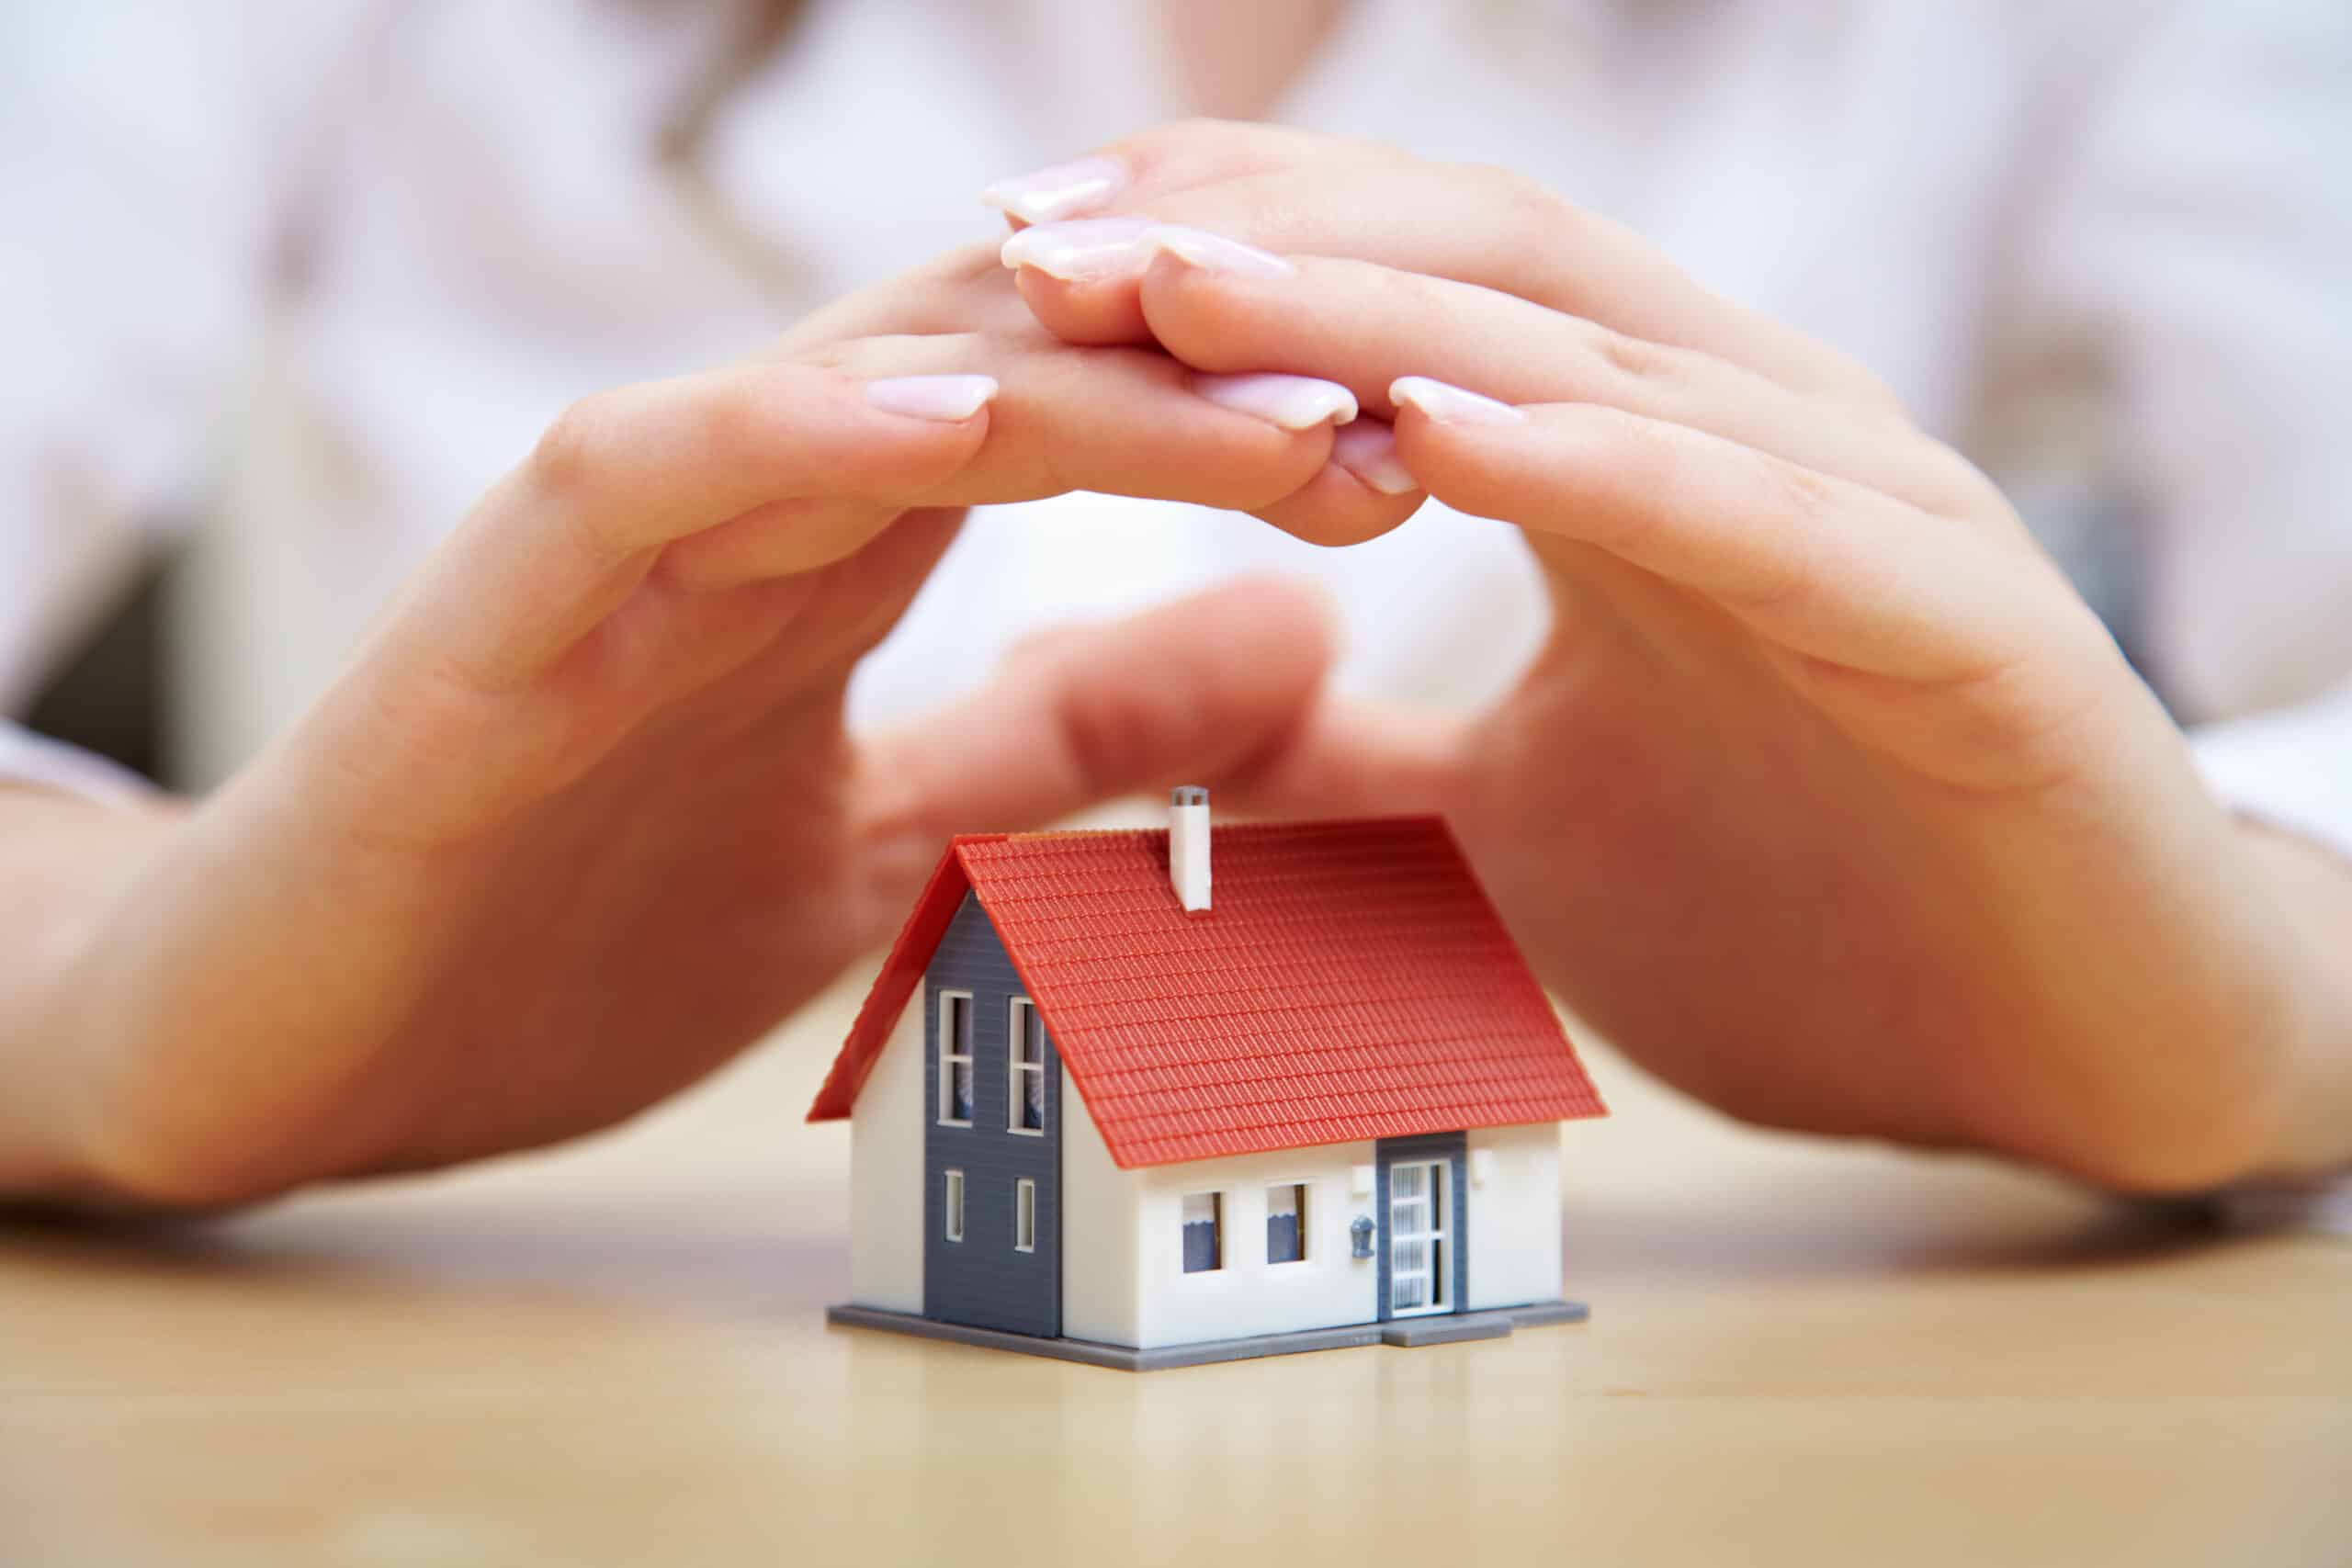 Female hands protecting small house